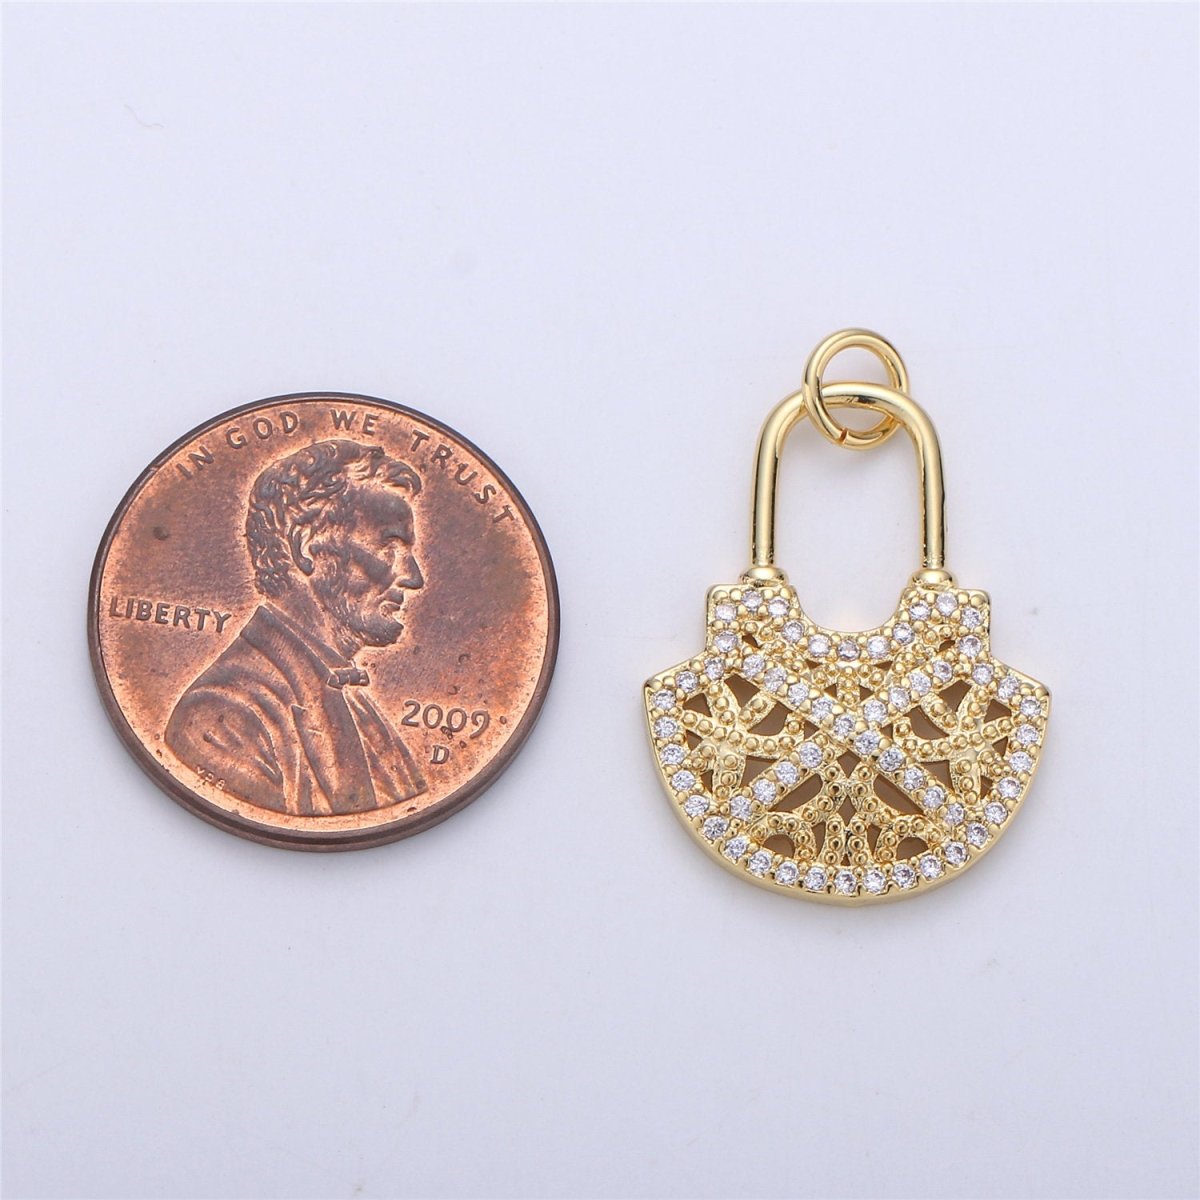 24k Gold Filled Micro Pave padlock charm for Jewelry making, Minimalist, Unique lock charm for Bracelet Necklace Earring Component - DLUXCA